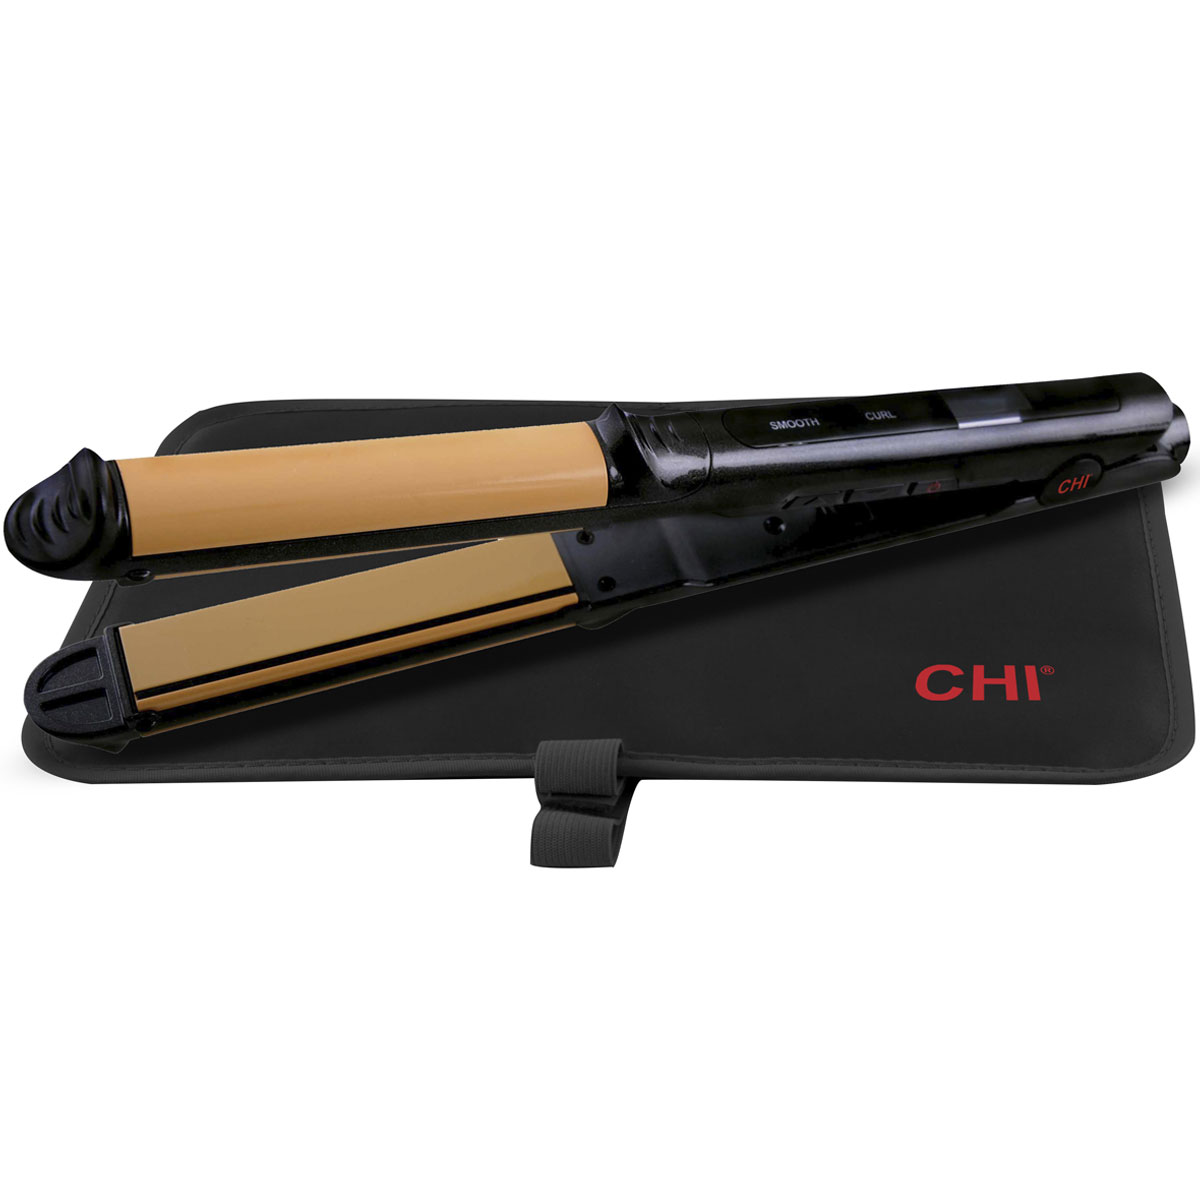 CHI 3-in-1 Hairstyling Iron